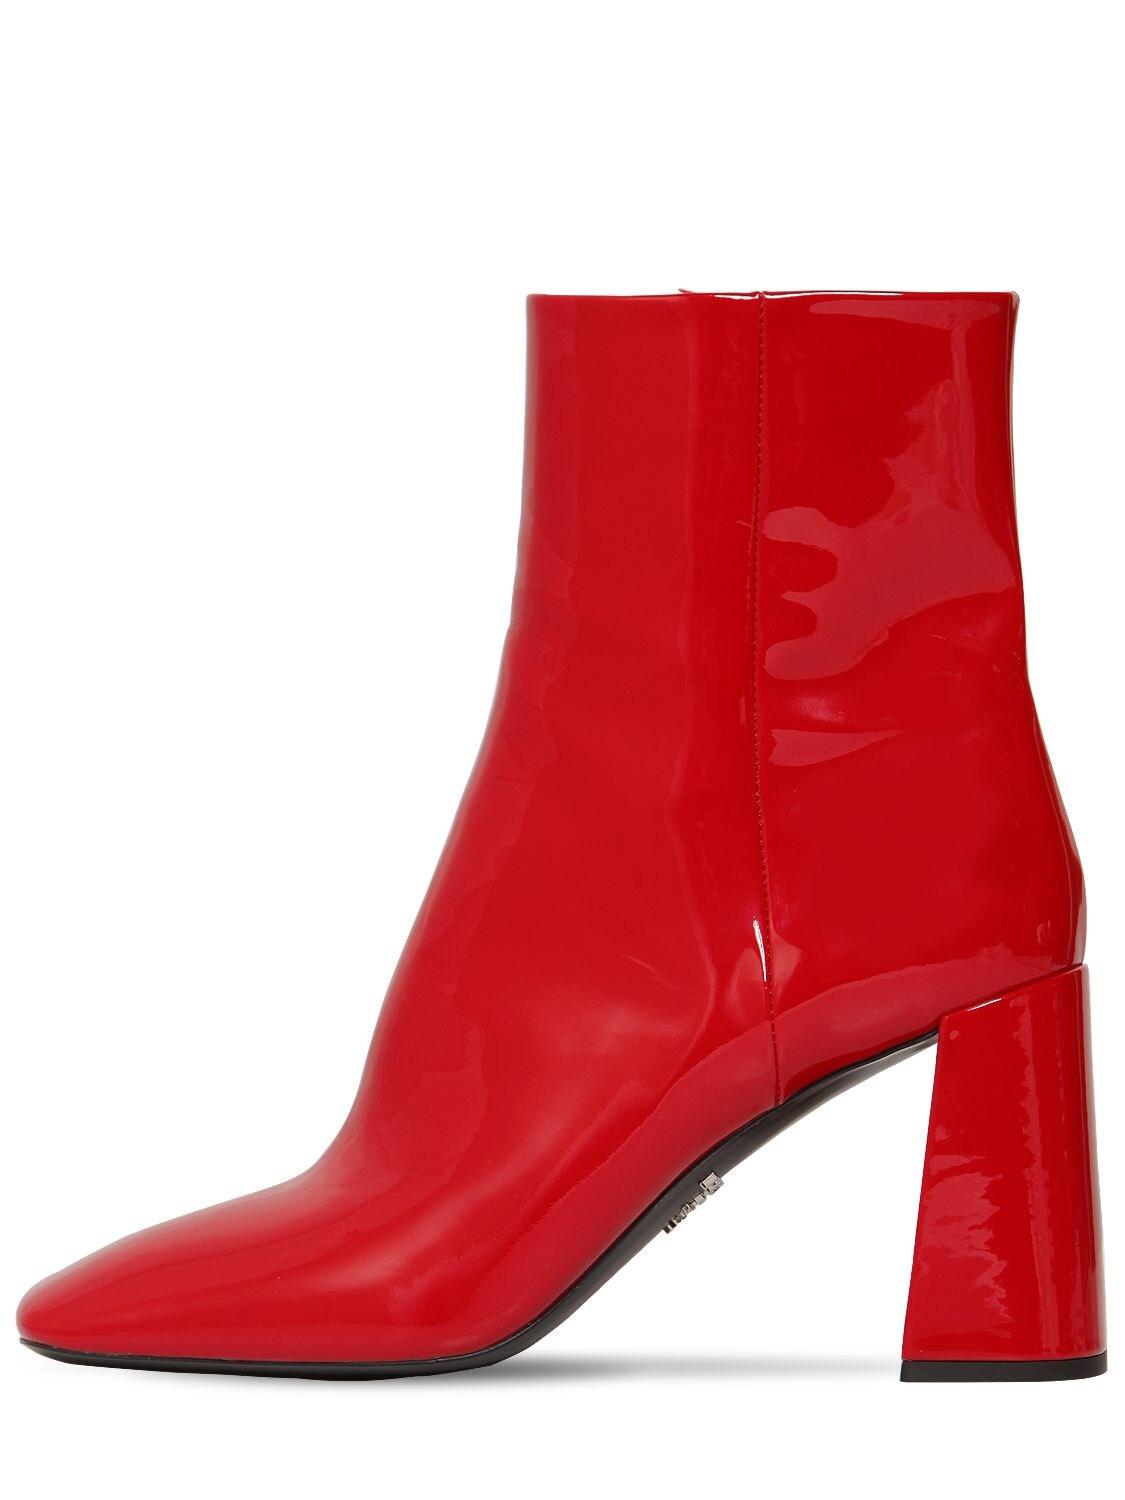 Prada 85mm Patent Leather Ankle Boots in Red - Lyst